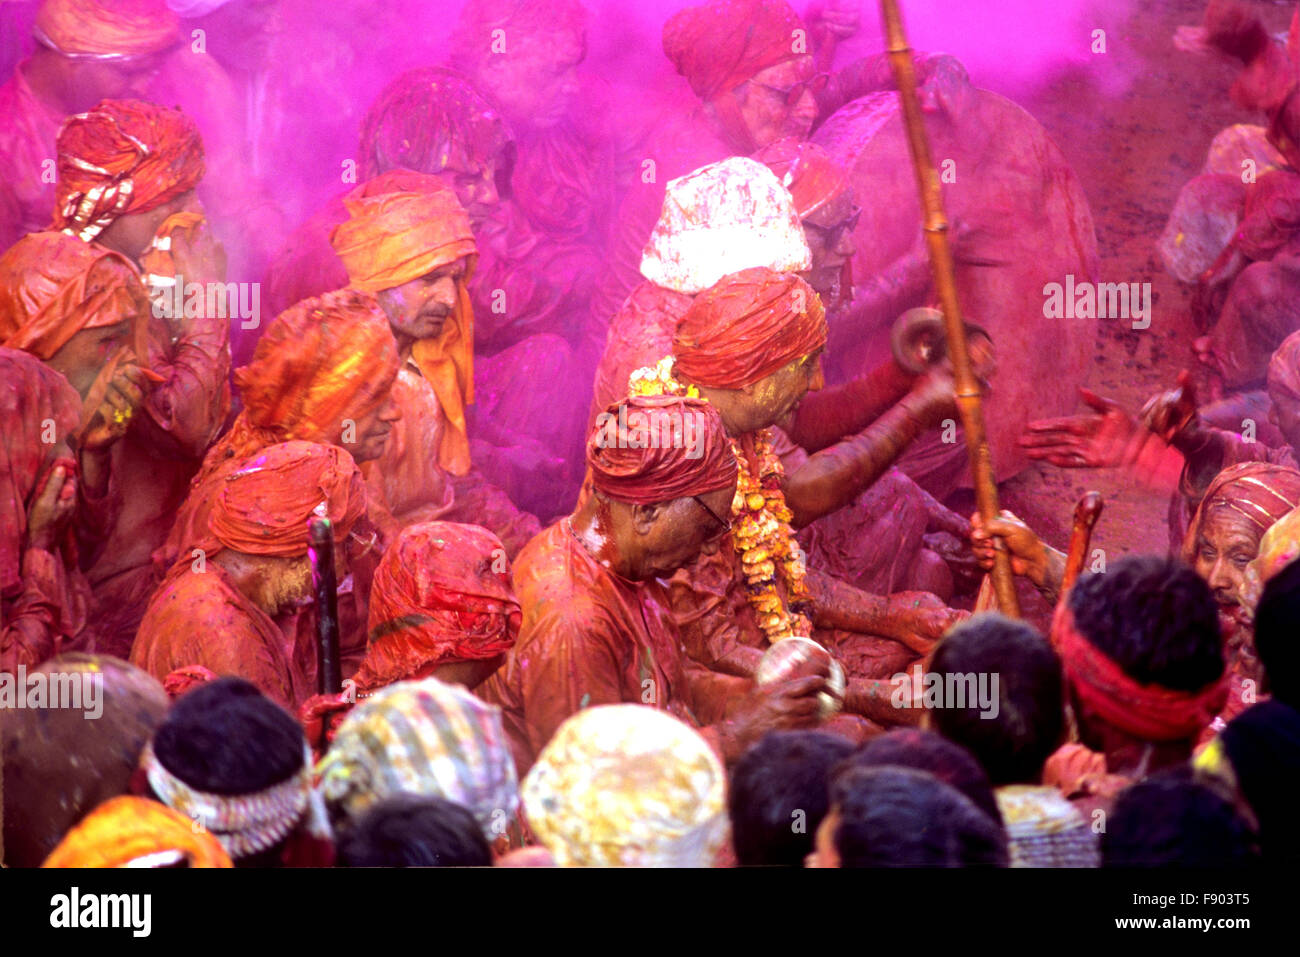 People daubed in colored water, singing a hymn moving towards a  temple during “Holi festival” at Mathura, Uttar Pradesh, India. Stock Photo